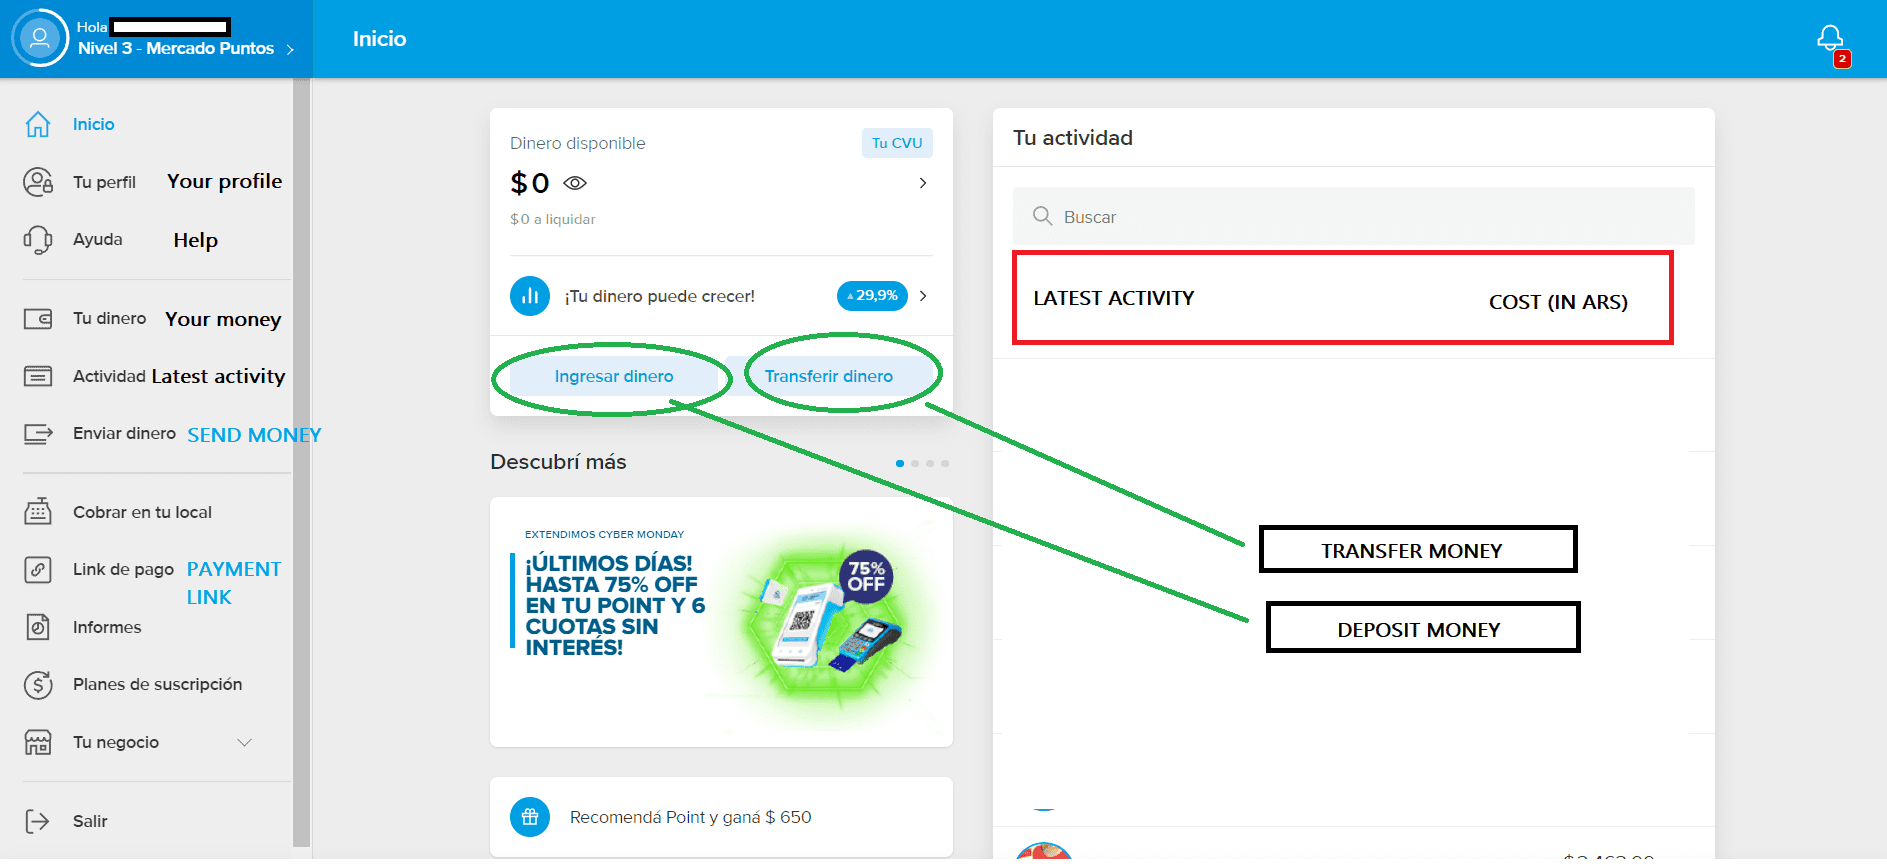 How to use e-commerce online shopping in Argentina with Mercadopago